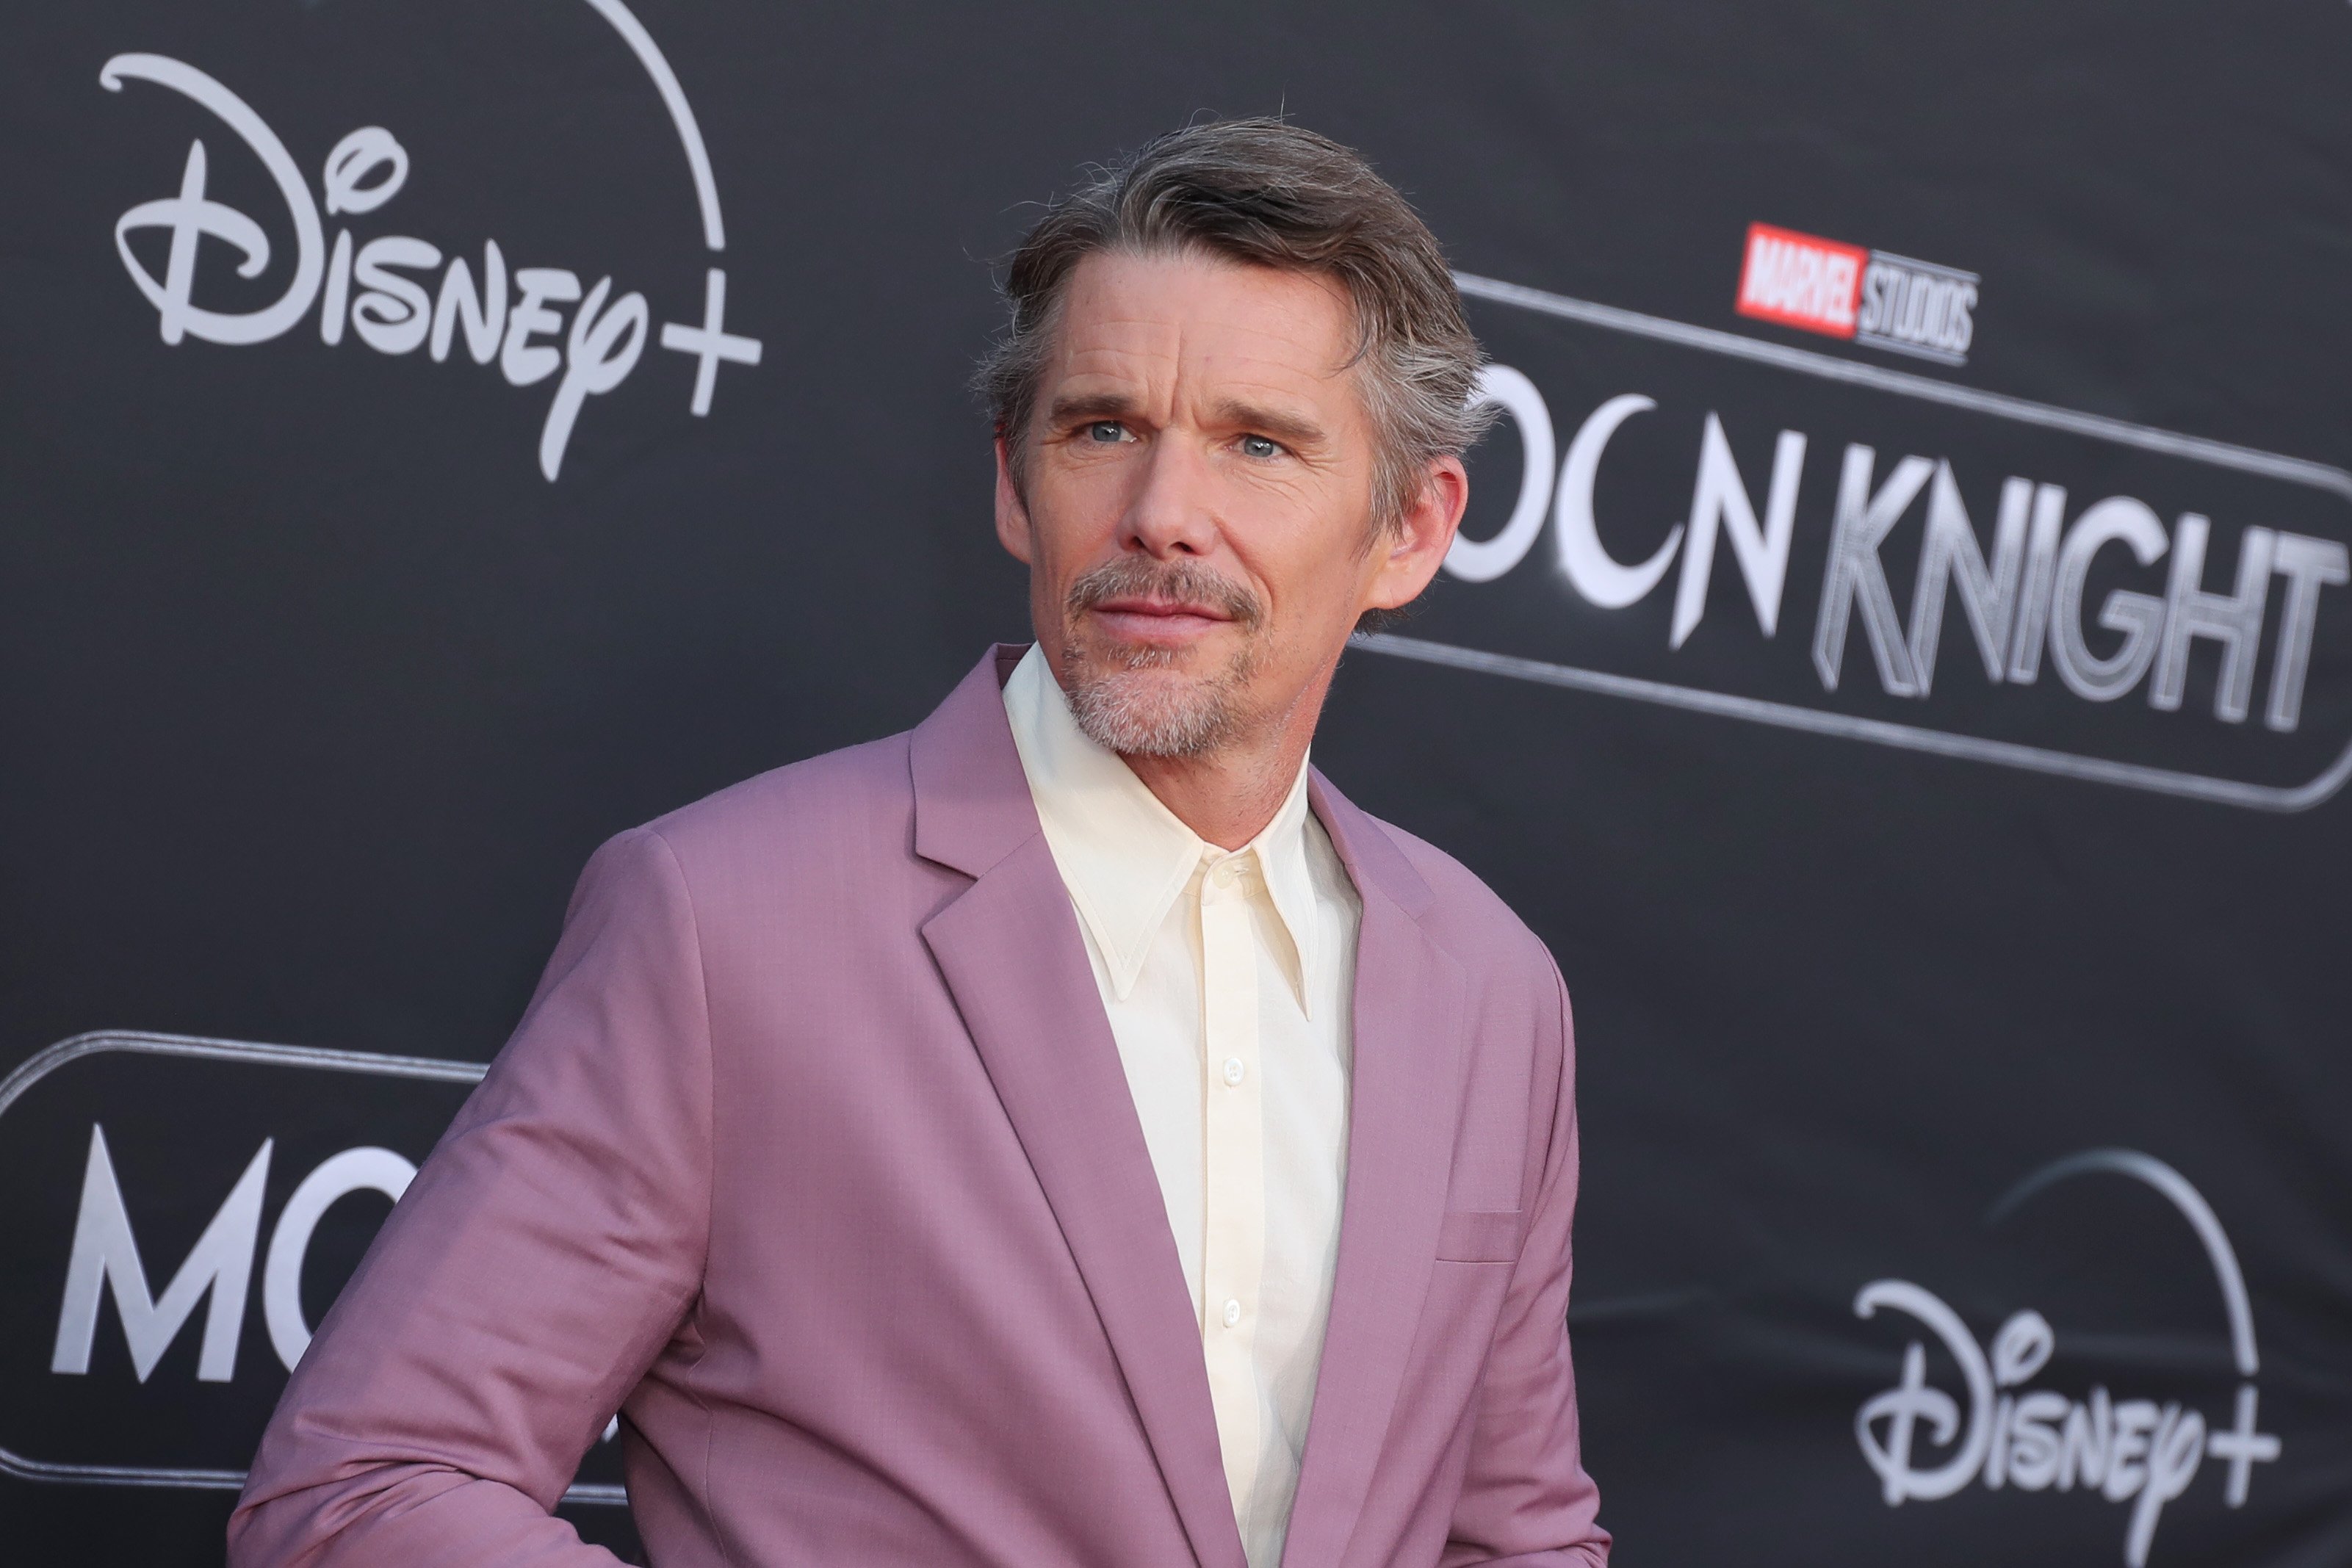 Ethan Hawke, who plays The Grabber in The Black Phone, attends the premiere of Moon Knight